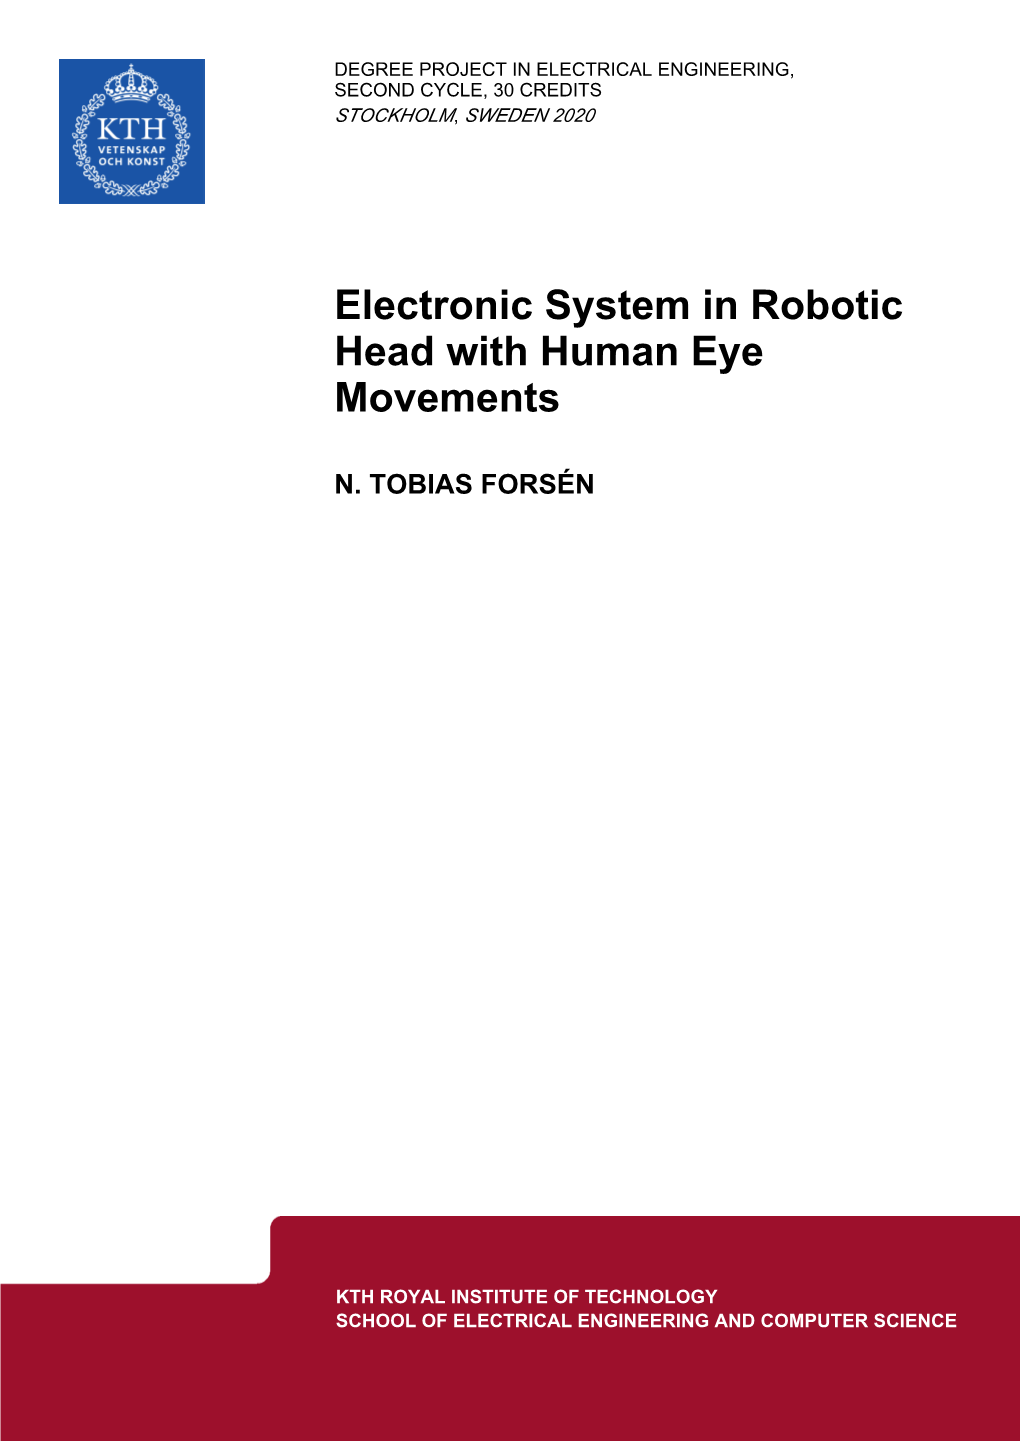 Electronic System in Robotic Head with Human Eye Movements